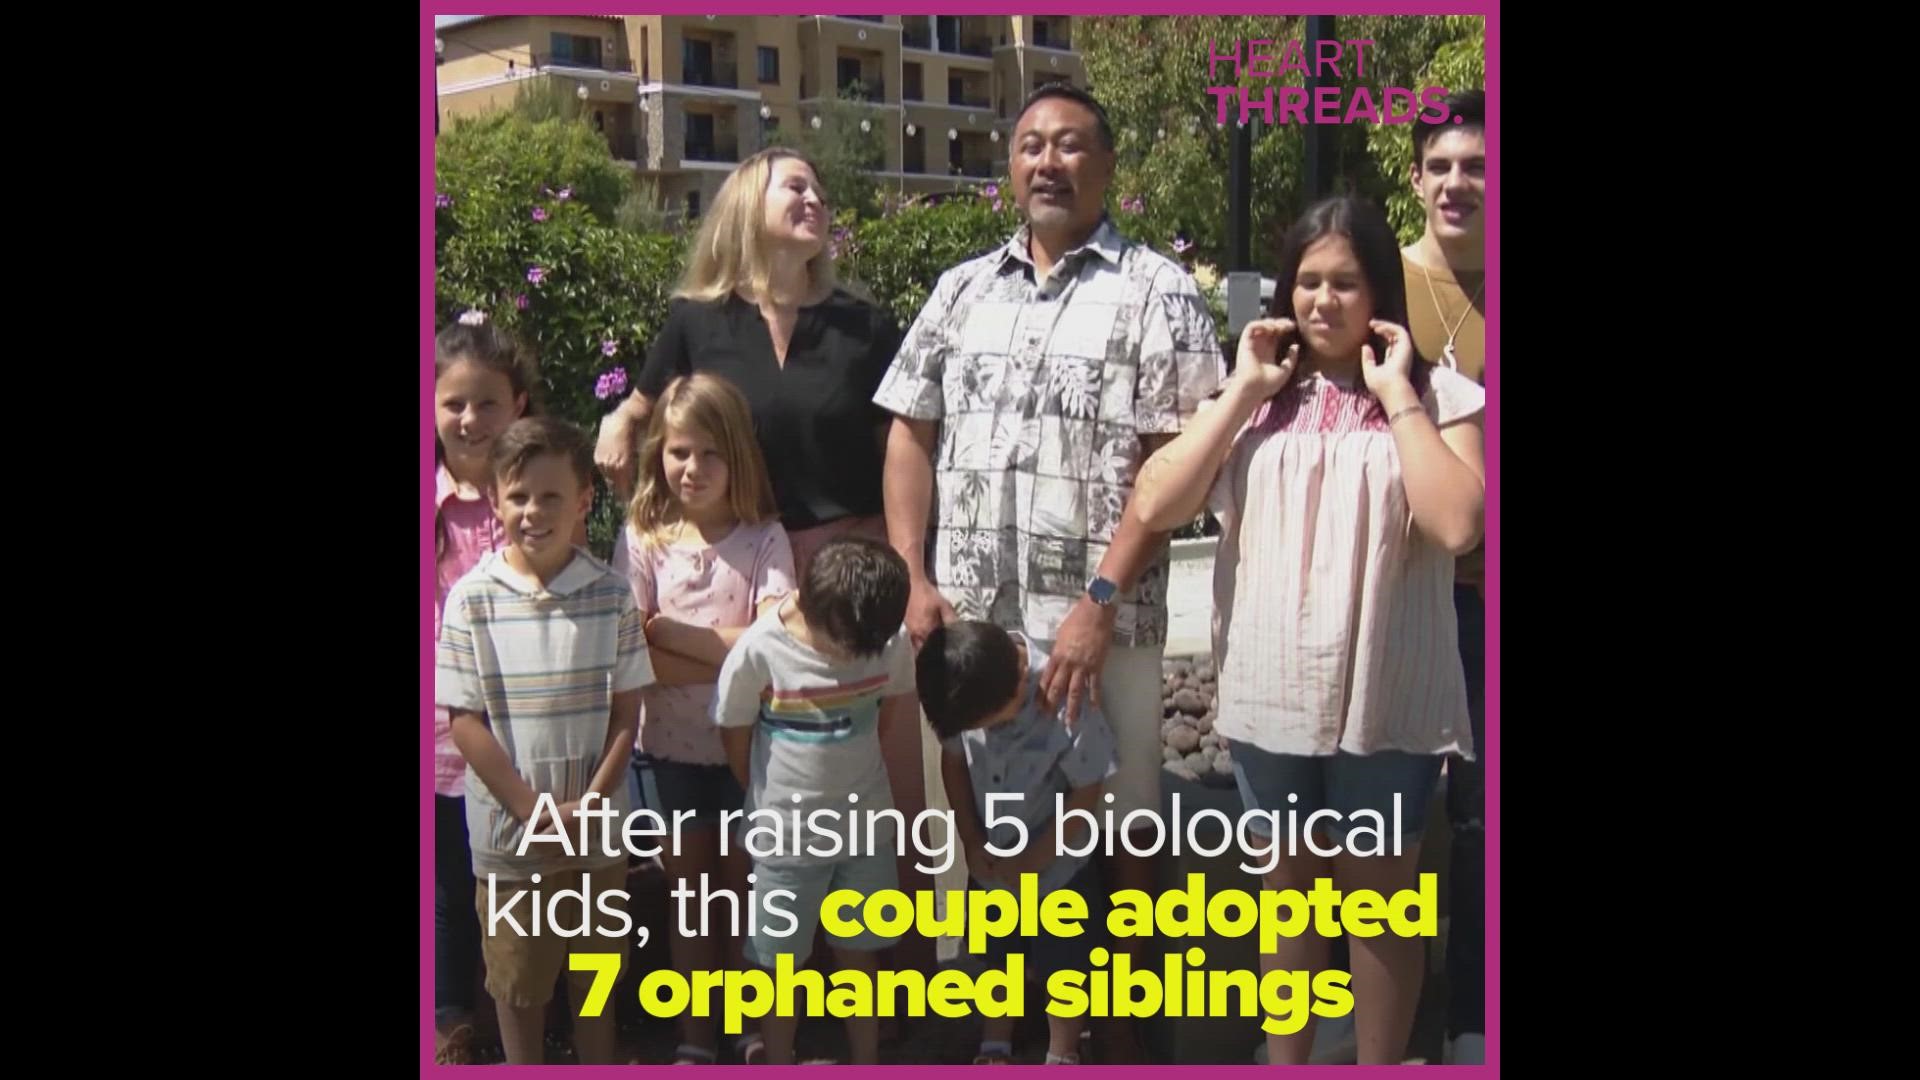 After raising five kids of their own, this family adopted seven siblings who were orphaned in a car accident.